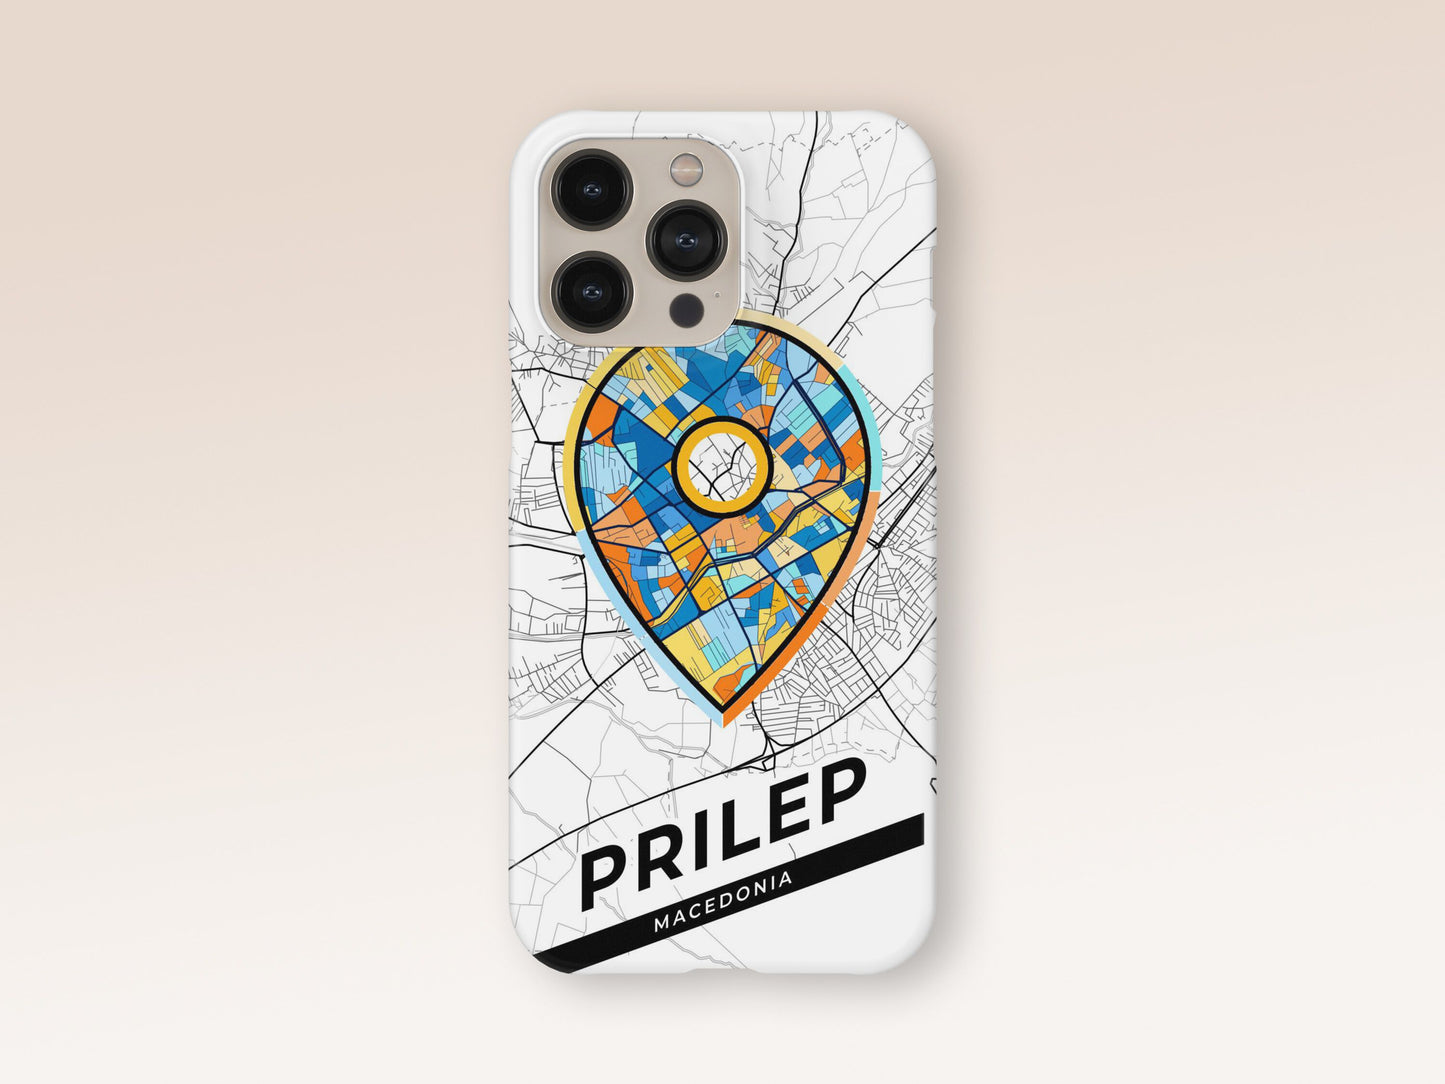 Prilep North Macedonia slim phone case with colorful icon. Birthday, wedding or housewarming gift. Couple match cases. 1